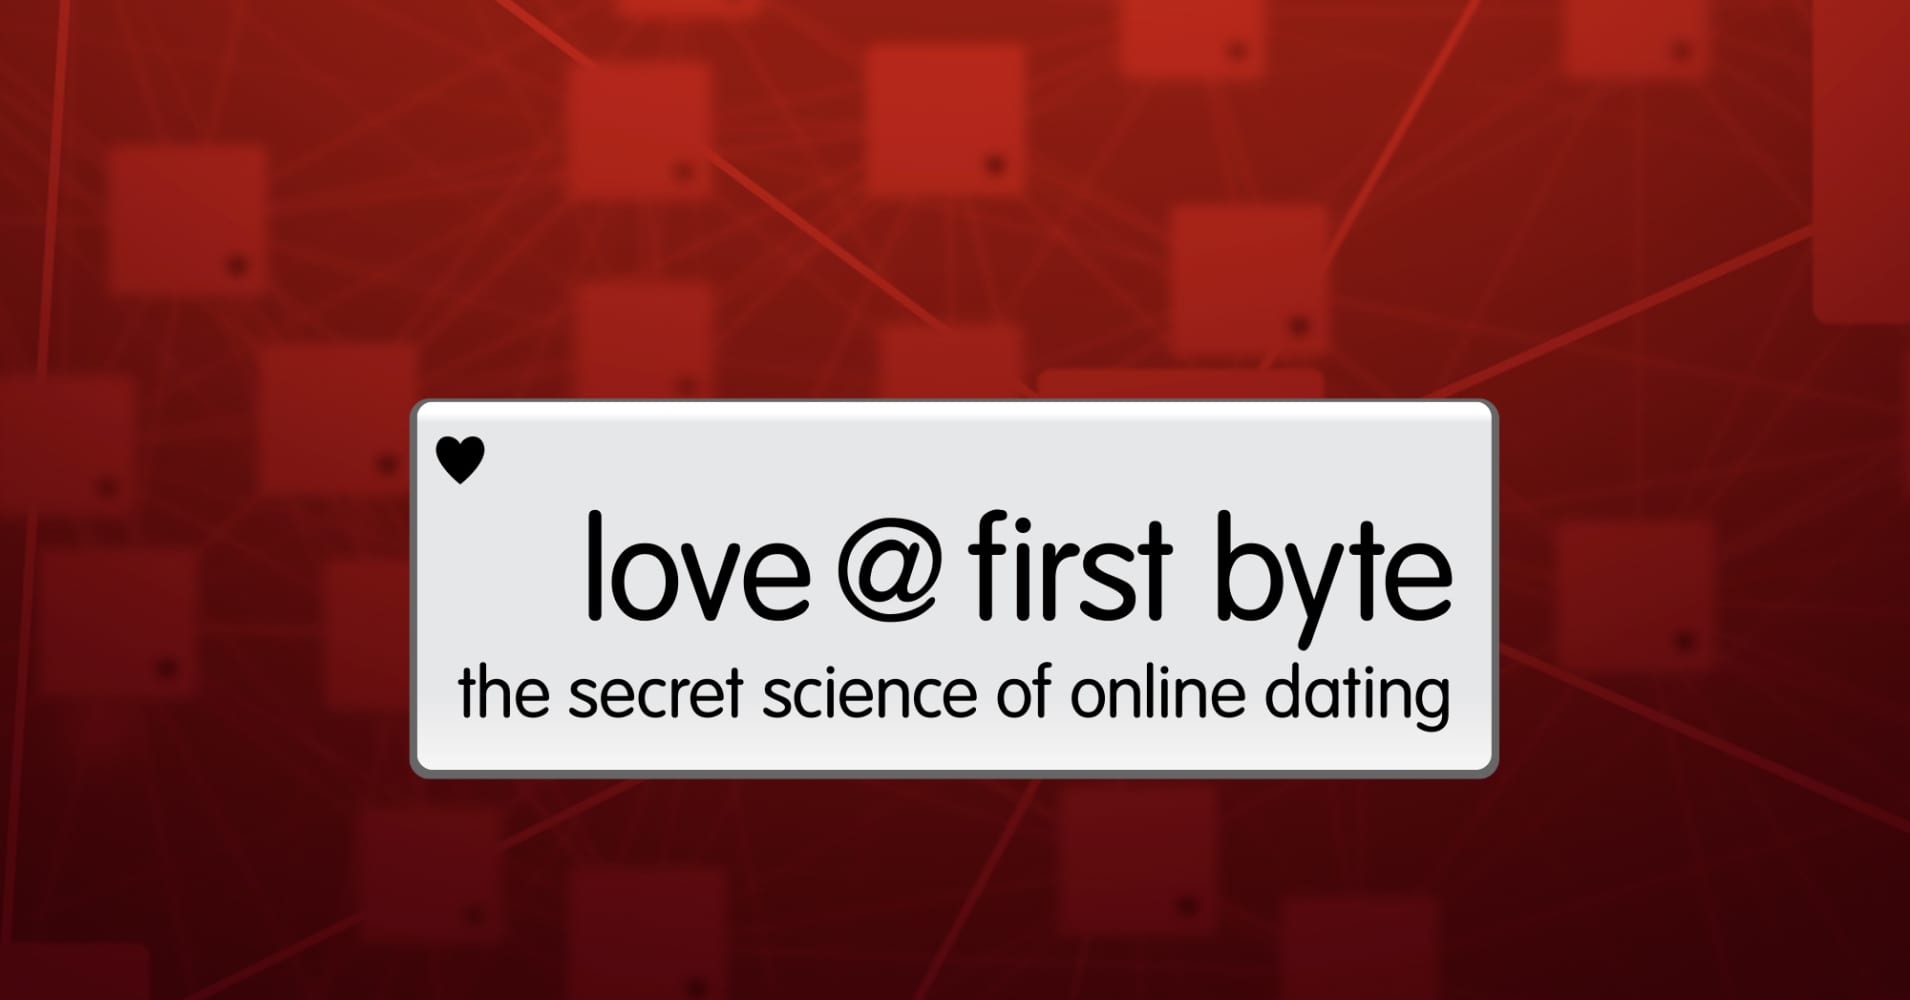 Love at First Byte: The Secret Science of Online Dating